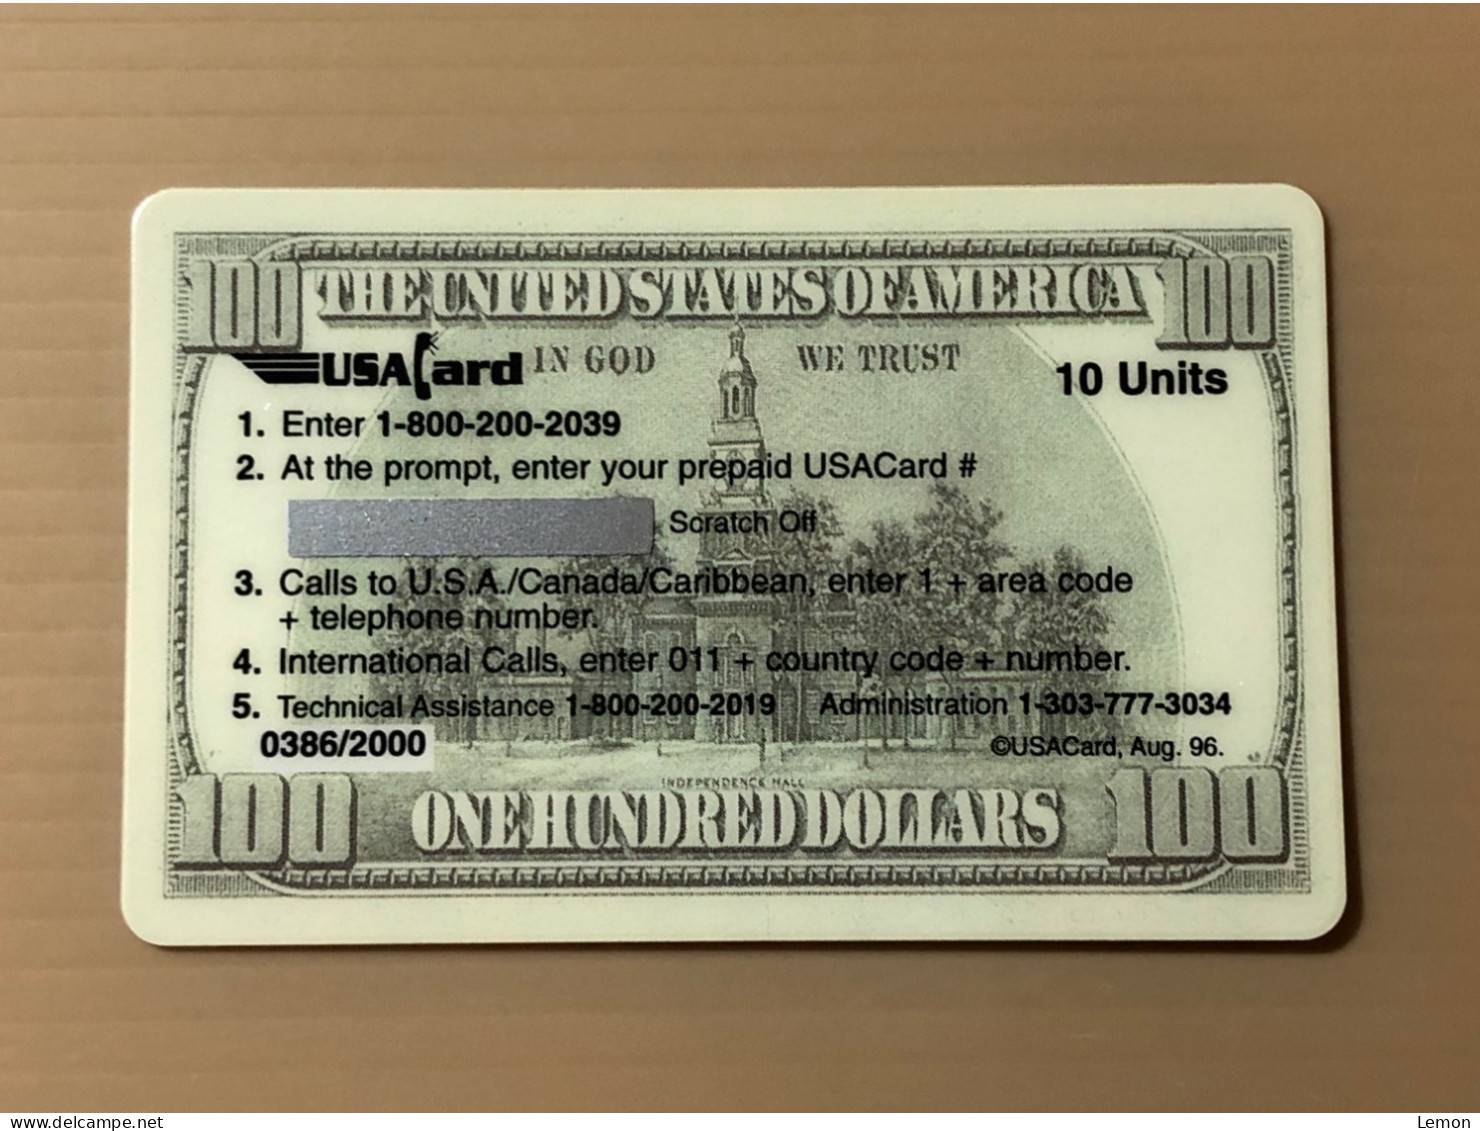 Mint USA UNITED STATES America Prepaid Telecard Phonecard, Banknote One Hundred Dollar Currency, Set Of 1 Mint Card - Collections